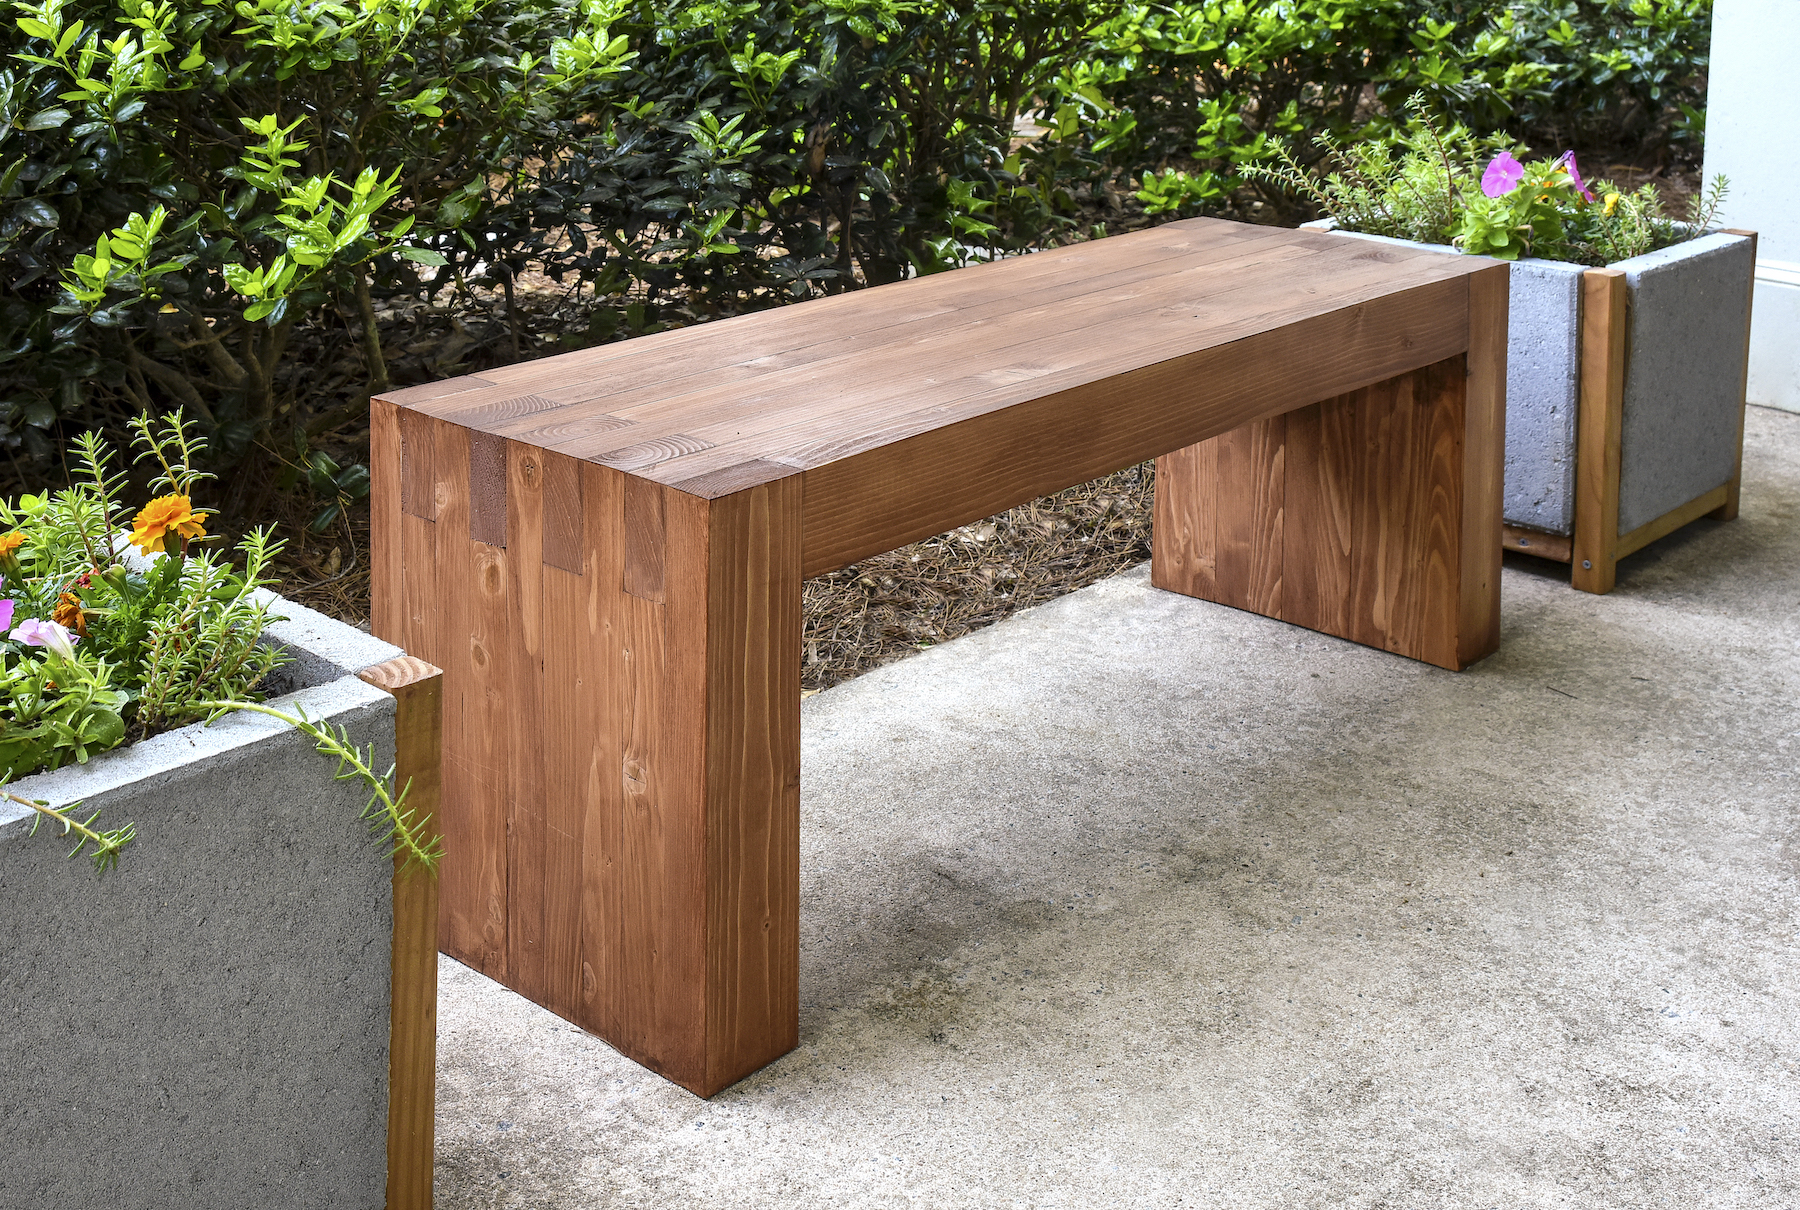 How to build a wood bench